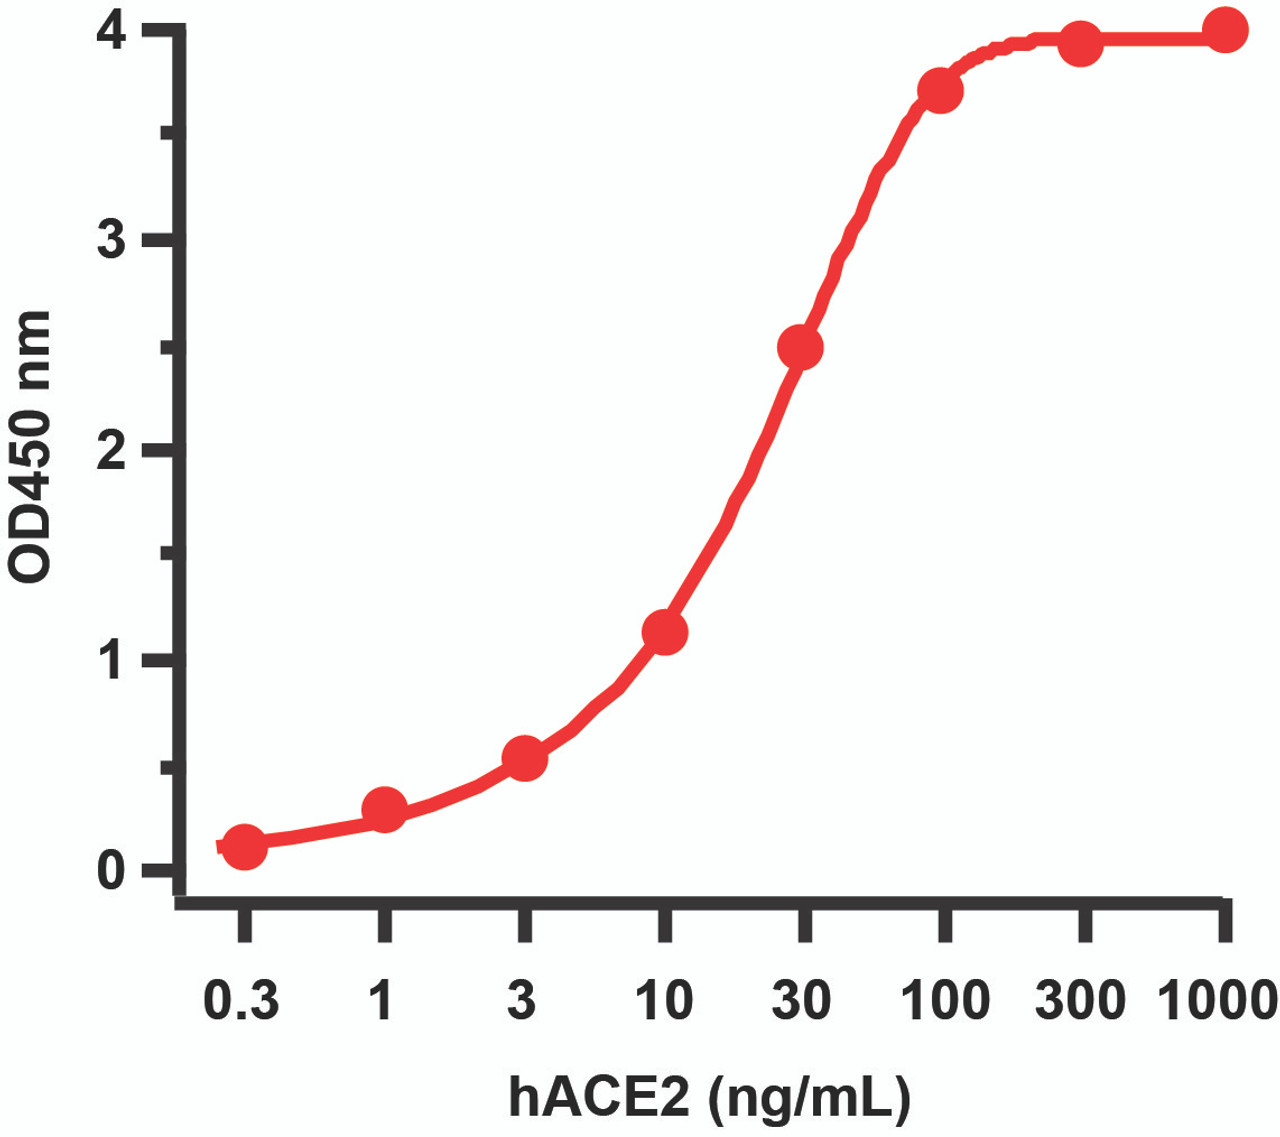 ELISA Binding Assay of ACE2 and SARS-CoV-2 (COVID-19) Delta Variant Spike RBD Recombinant Protein 
Coating Antigen: SARS-CoV-2 Delta variant (B.1.671.2) spike RBD protein, 1 ;g/mL, incubated at 4 &#730;C overnight.
Detection Antibodies: ACE2 recombinant protein, 10-120, dilution: 0.3- 1000 ng/mL, incubated at RT for 1 hr.
Secondary Antibodies: Goat anti-human HRP at 1:10, 000, incubate at RT for 1 hr.